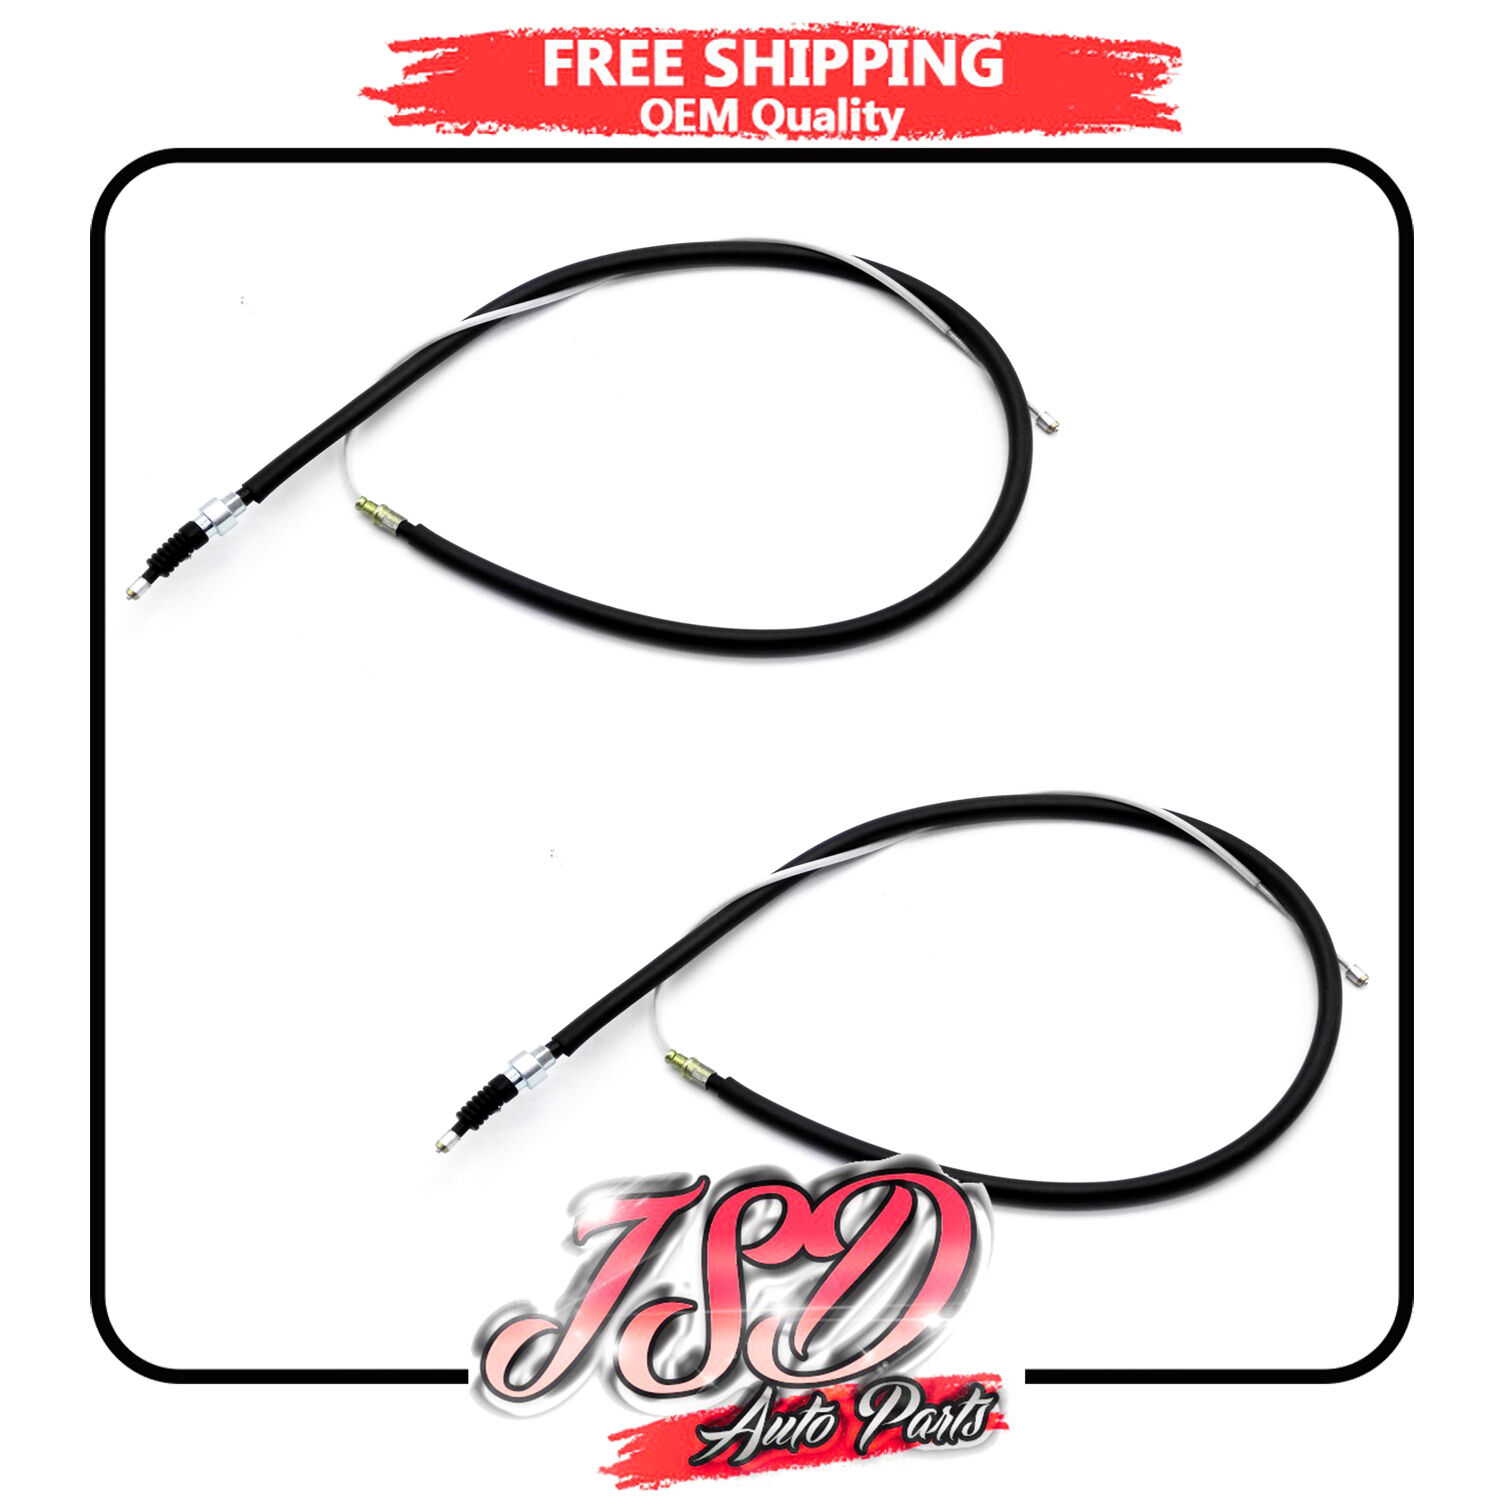 Pair New Left & Right Emergency Parking Brake Cable  Fits VW Jetta Golf Beetle